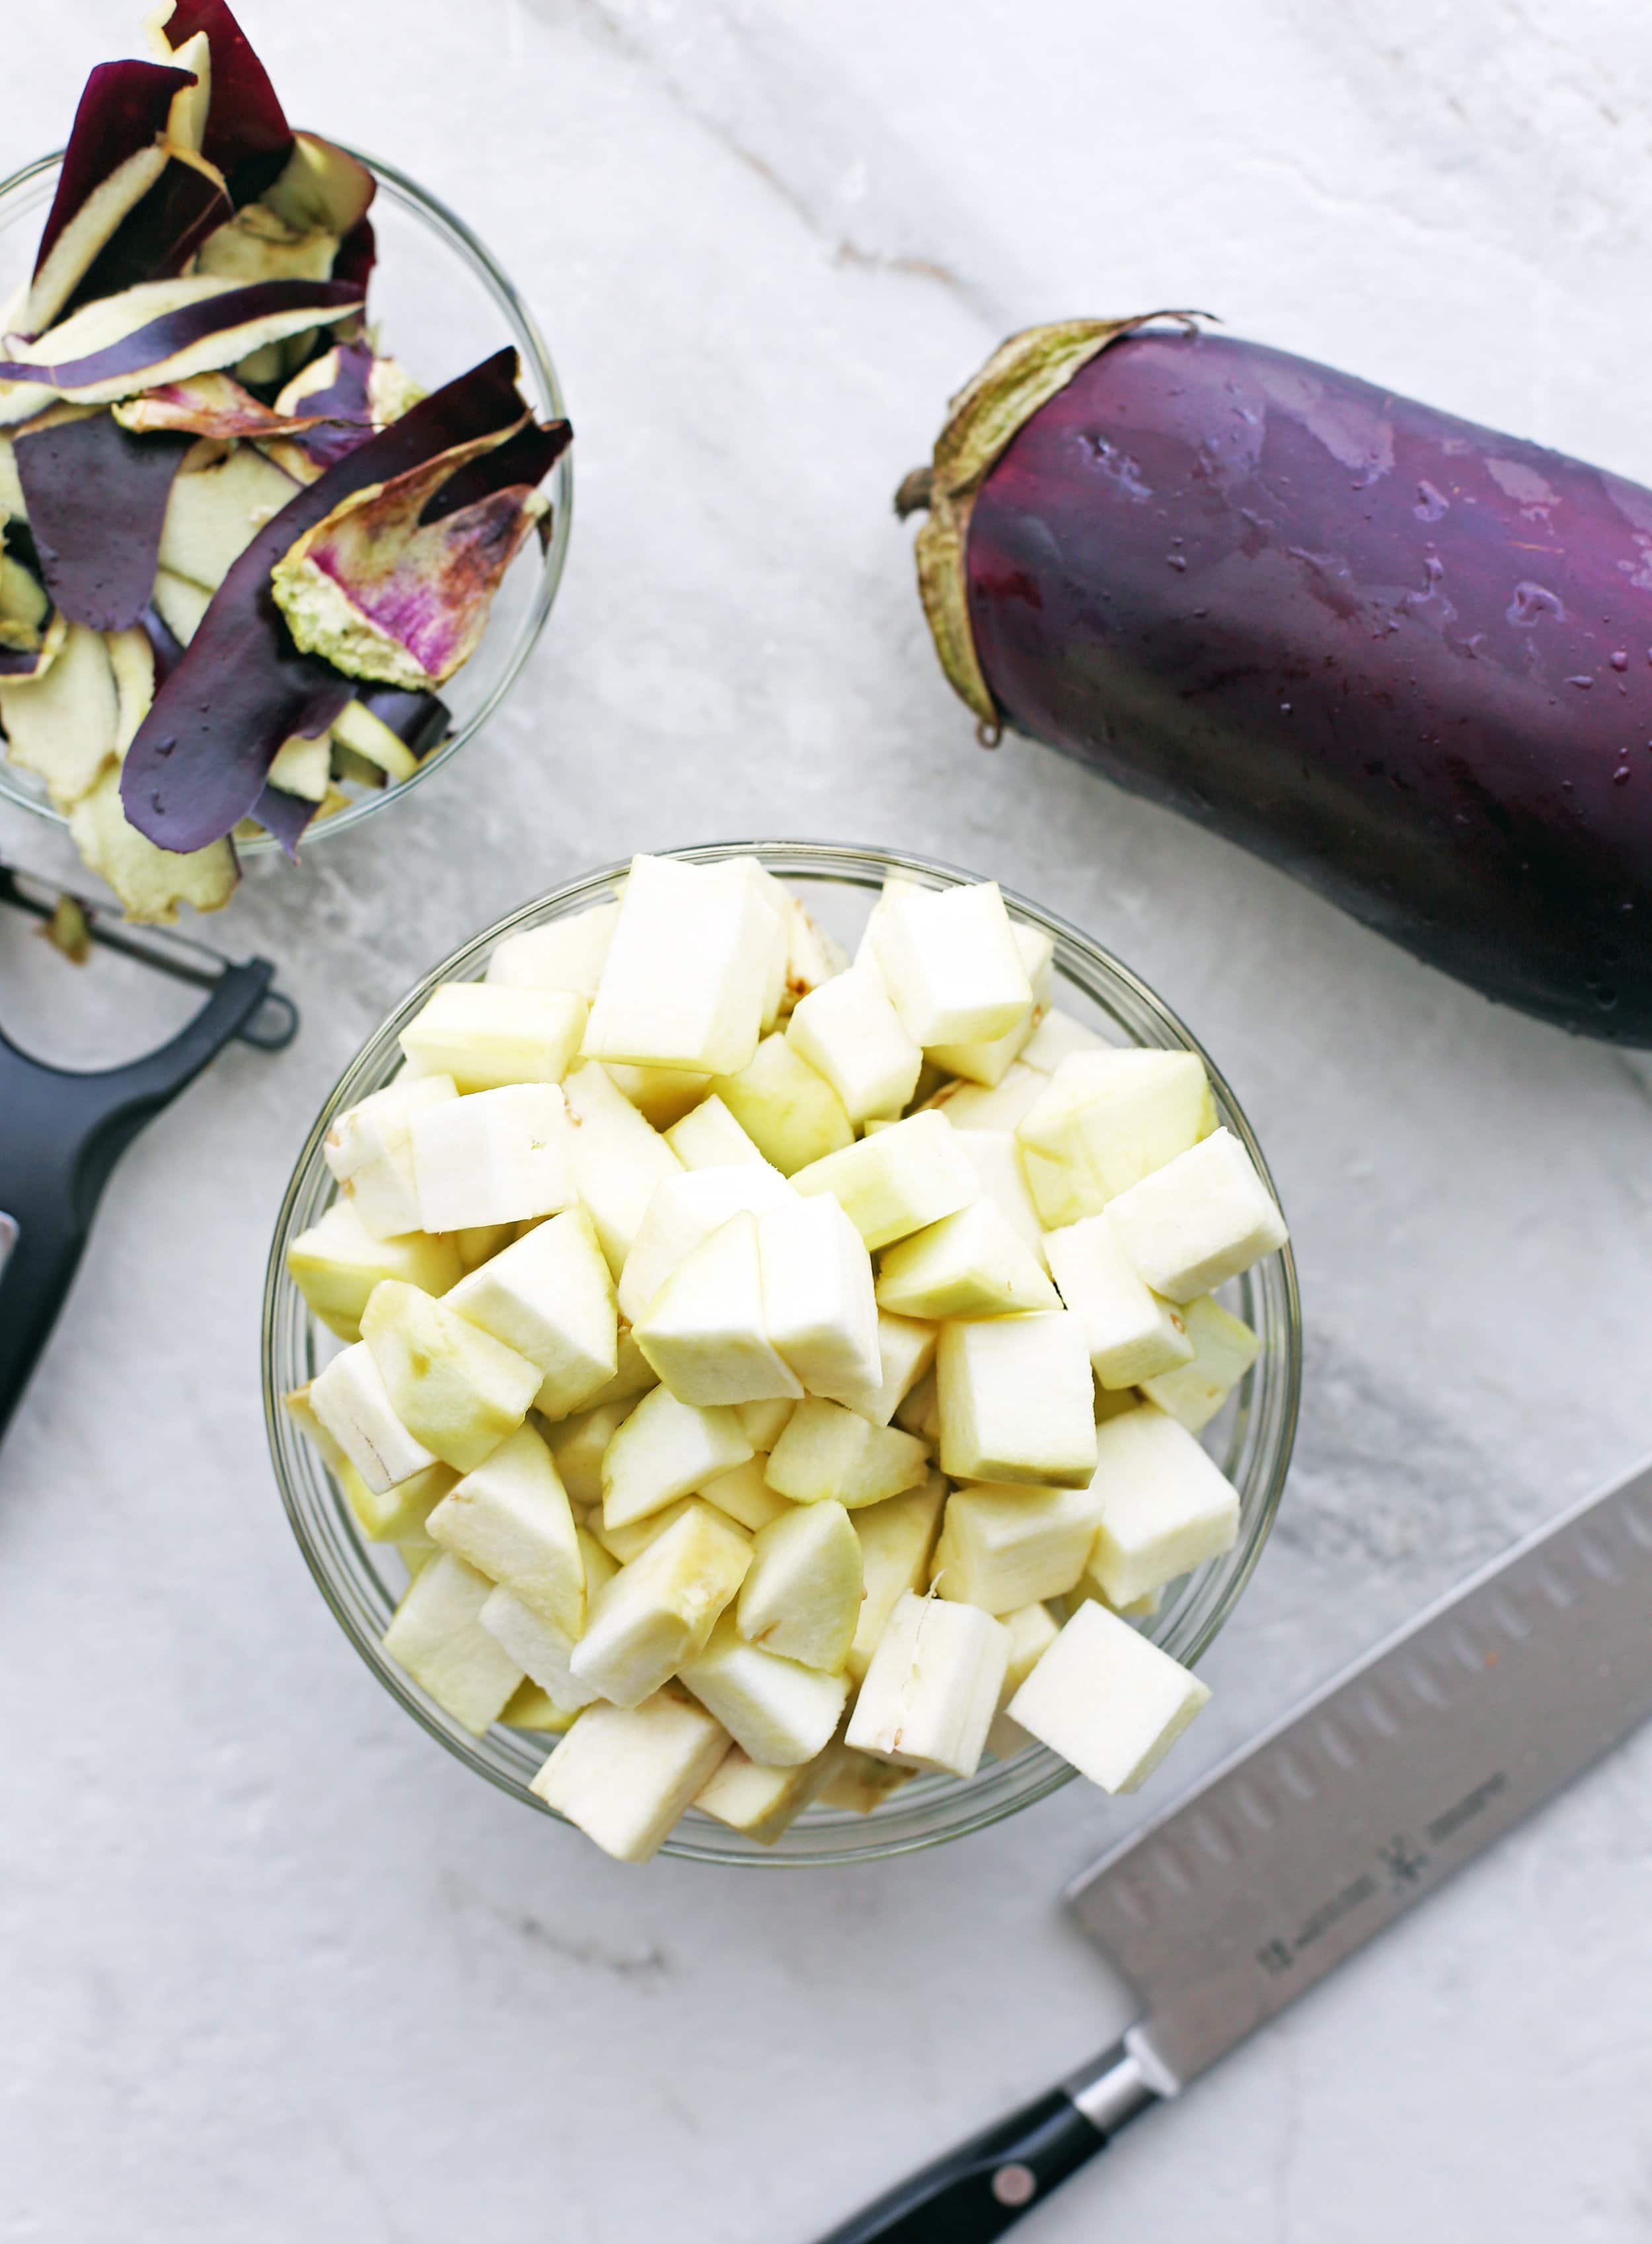 Peeled and chopped Italian eggplant in glass bowl with knife, another eggplant, and eggplant skin around the bowl.